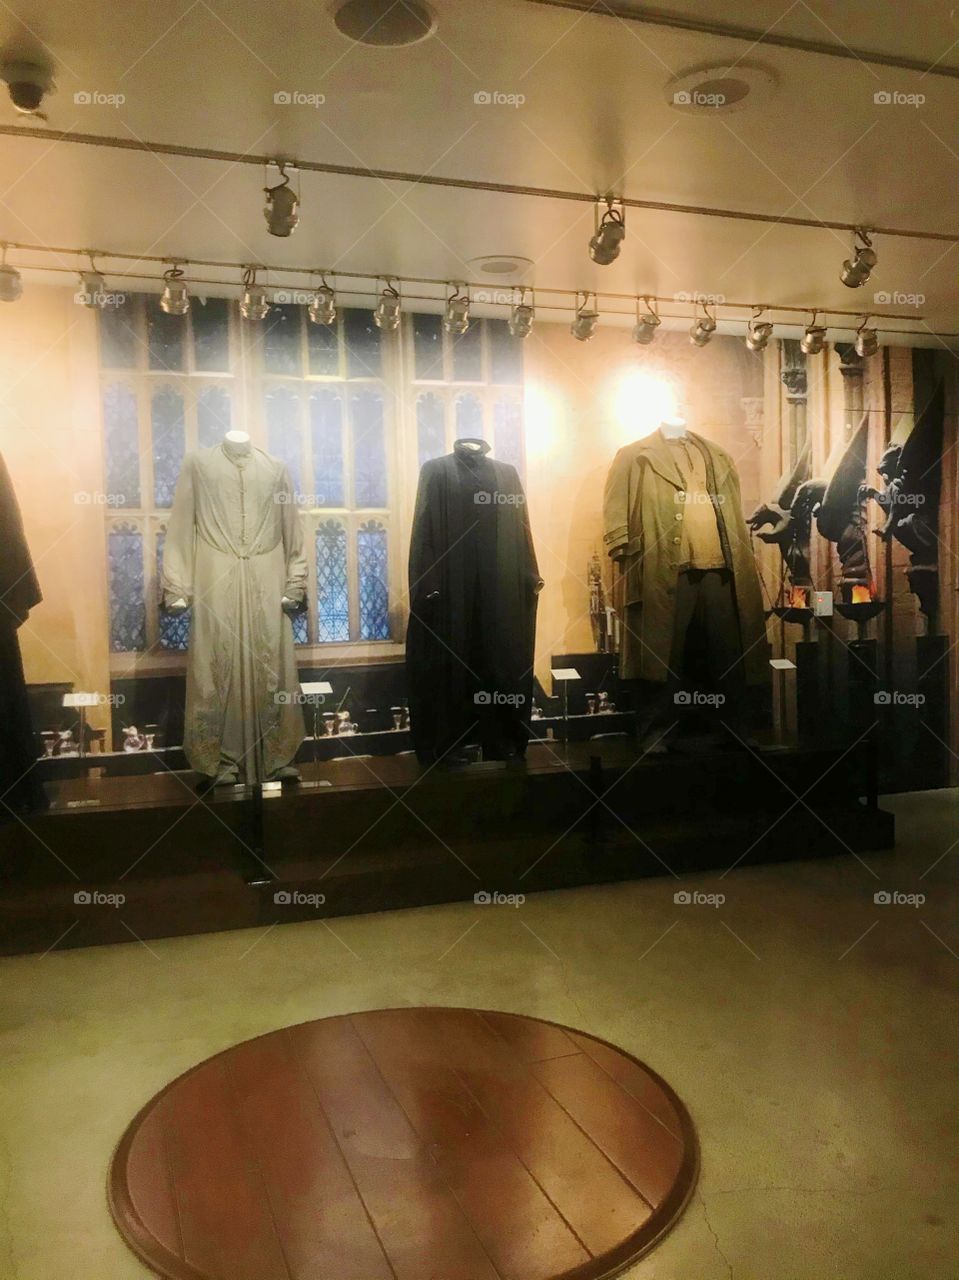 Warner brothers studio tour through the original cast costumes for the Harry Potter cast 